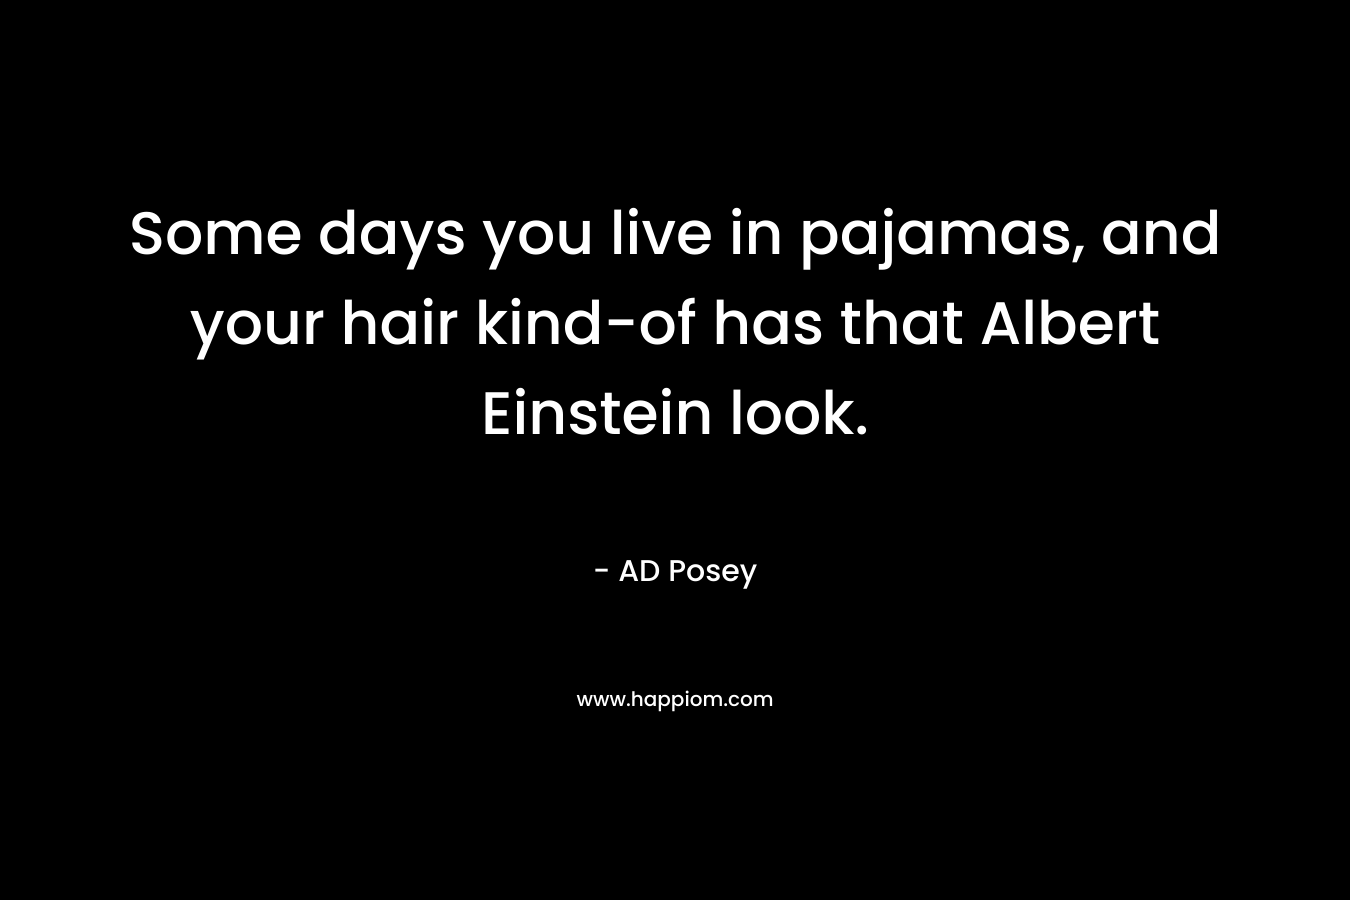 Some days you live in pajamas, and your hair kind-of has that Albert Einstein look. – AD Posey